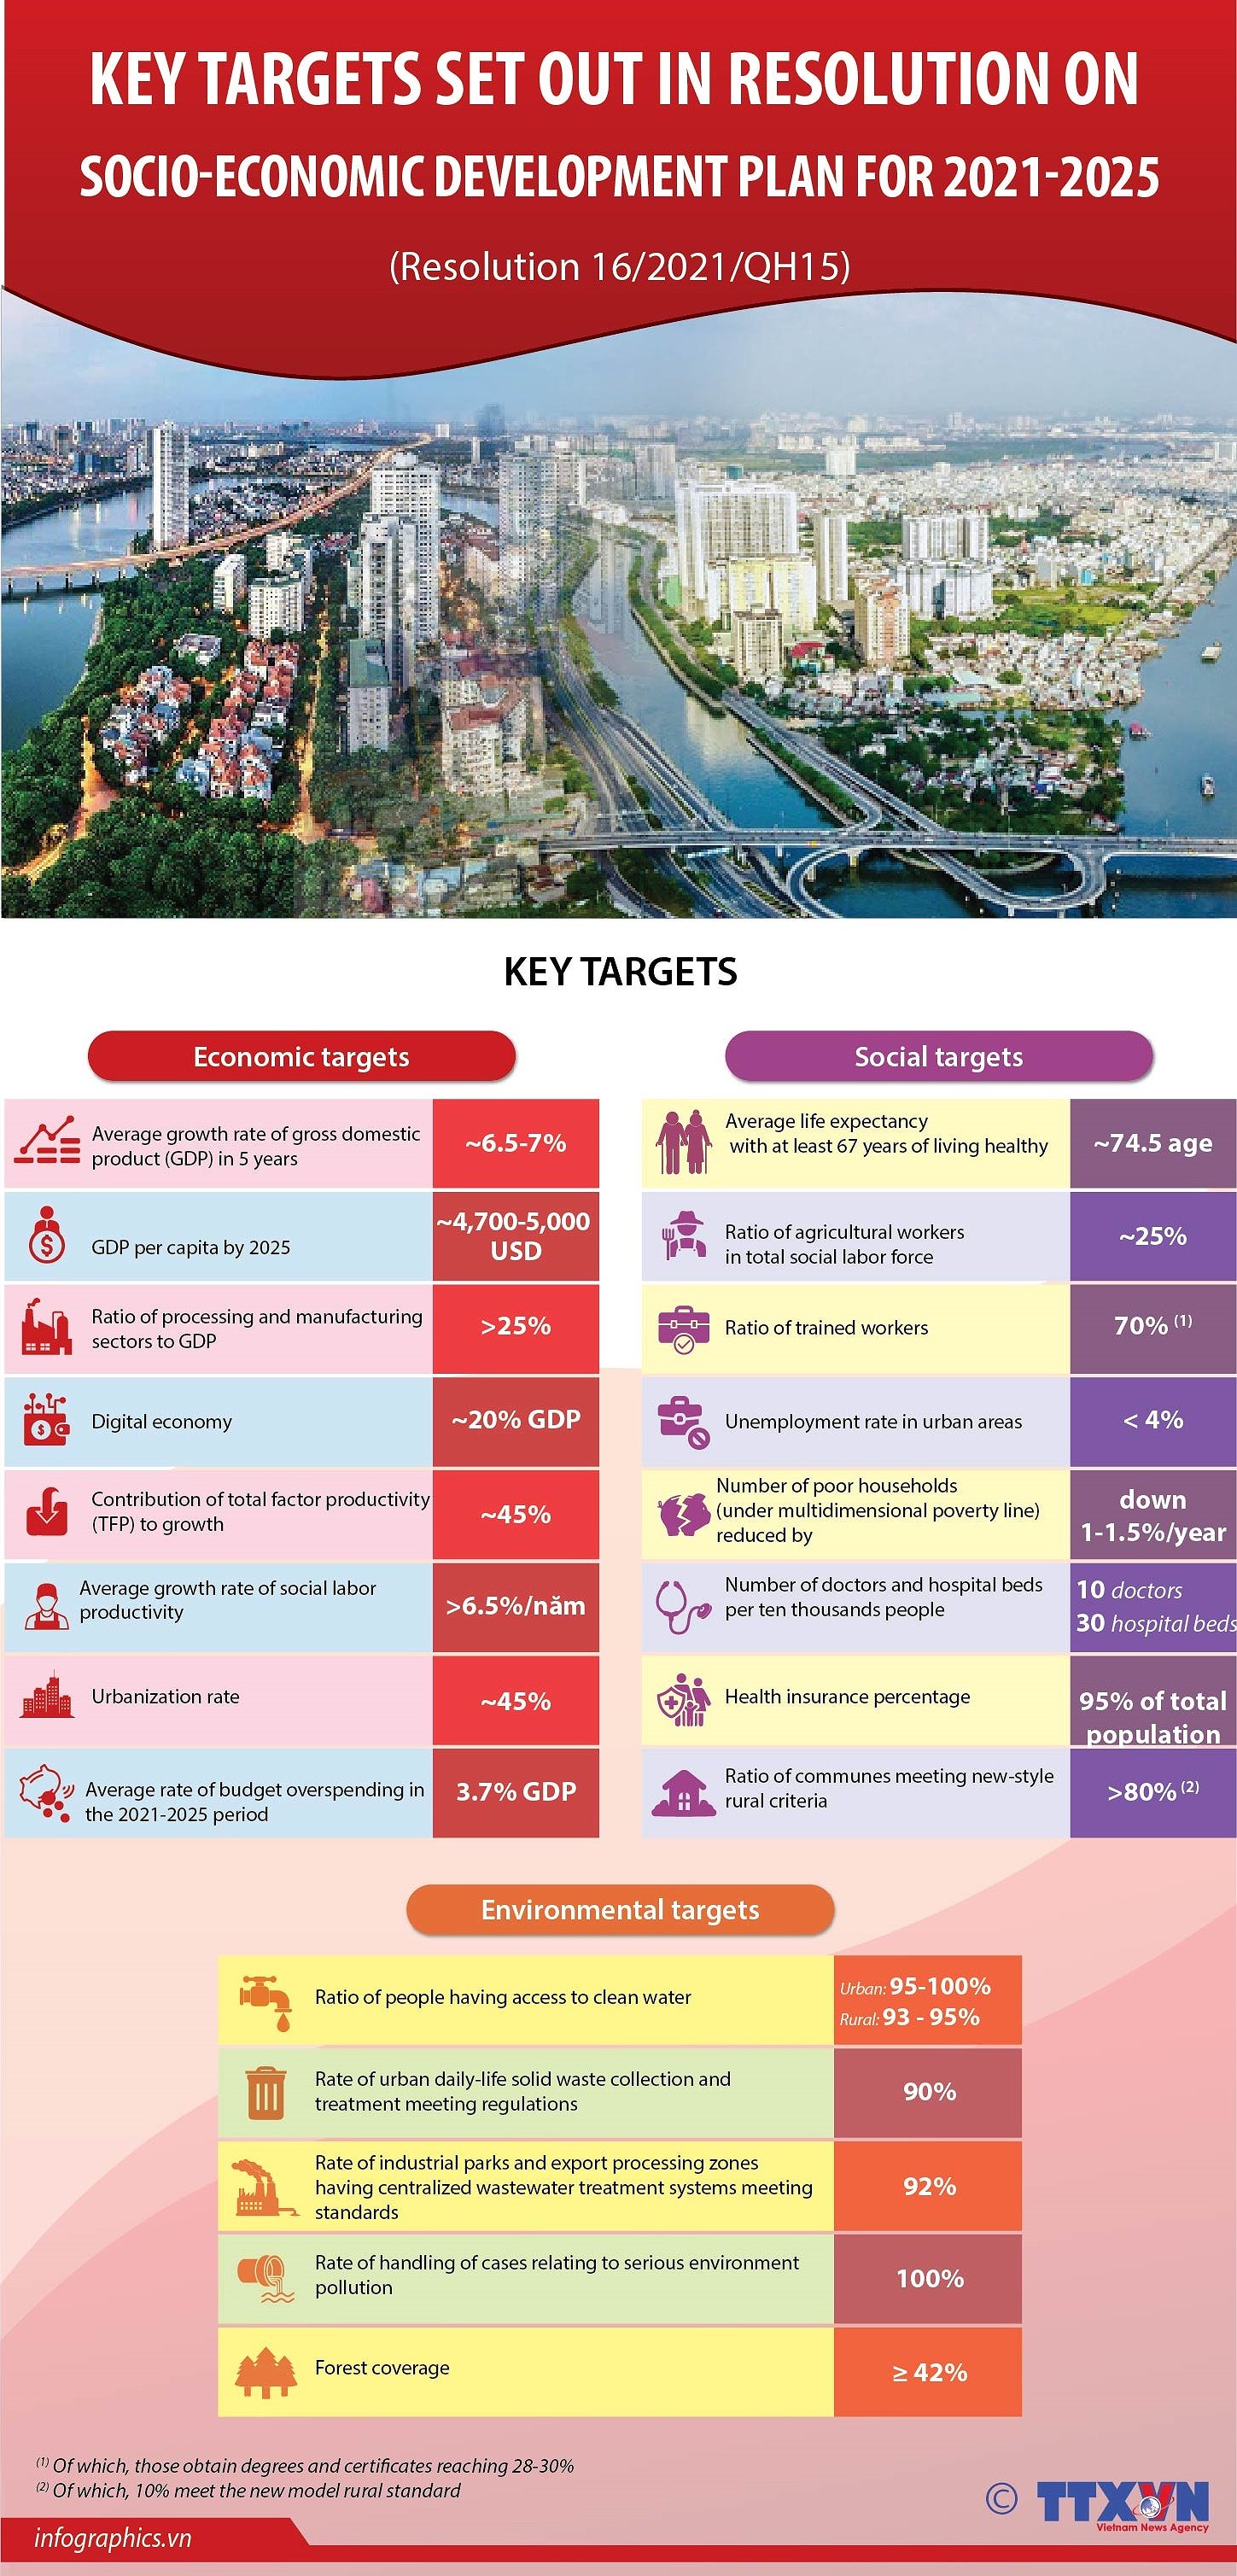 Key targets set out in resolution on socio-economic development plan for 2021-2025 hinh anh 1